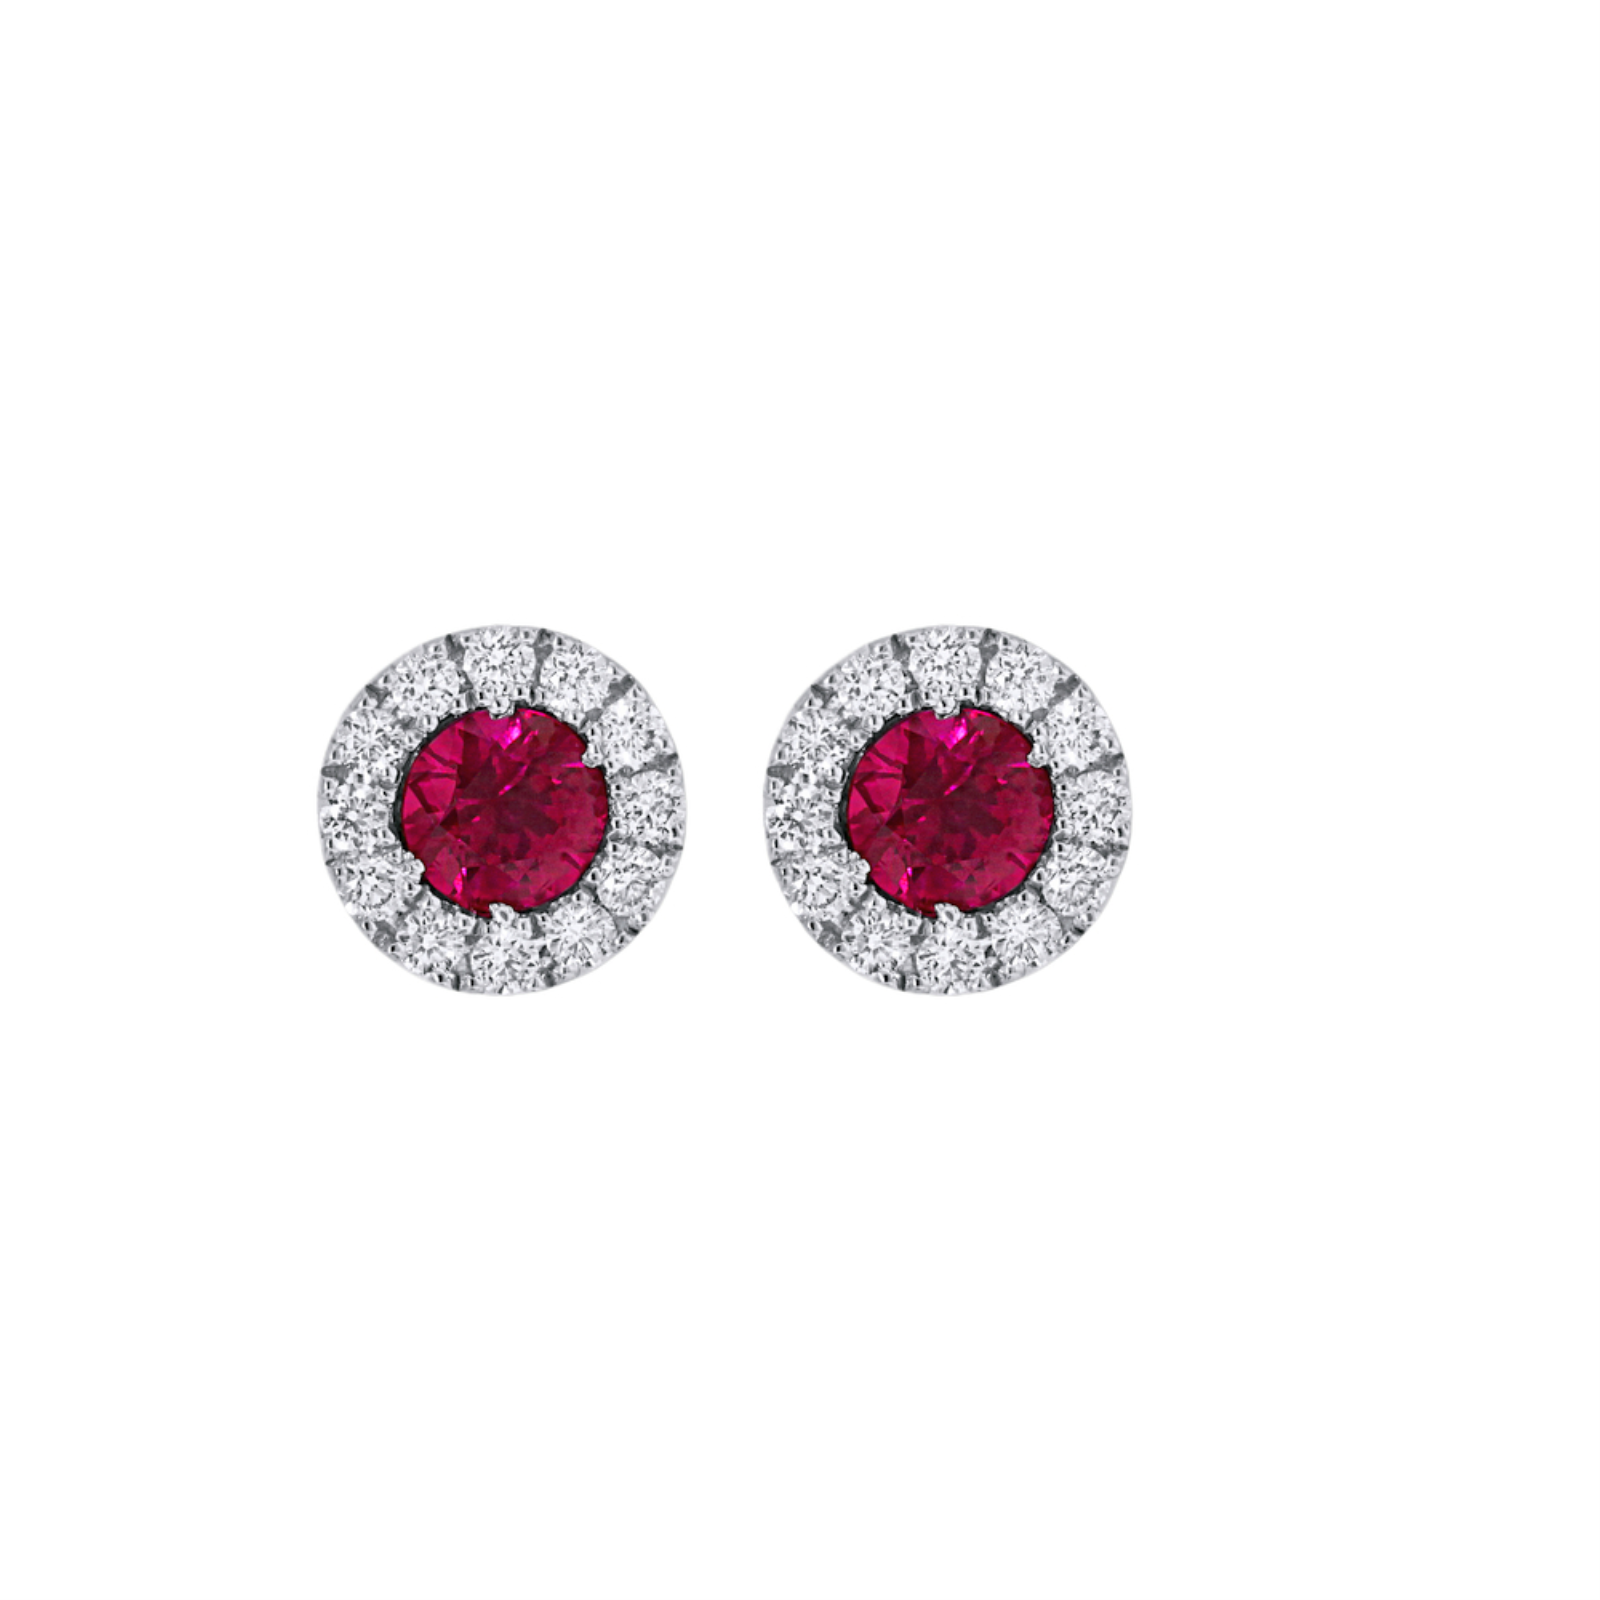 White Gold Ruby and Diamond Halo Stud Earrings